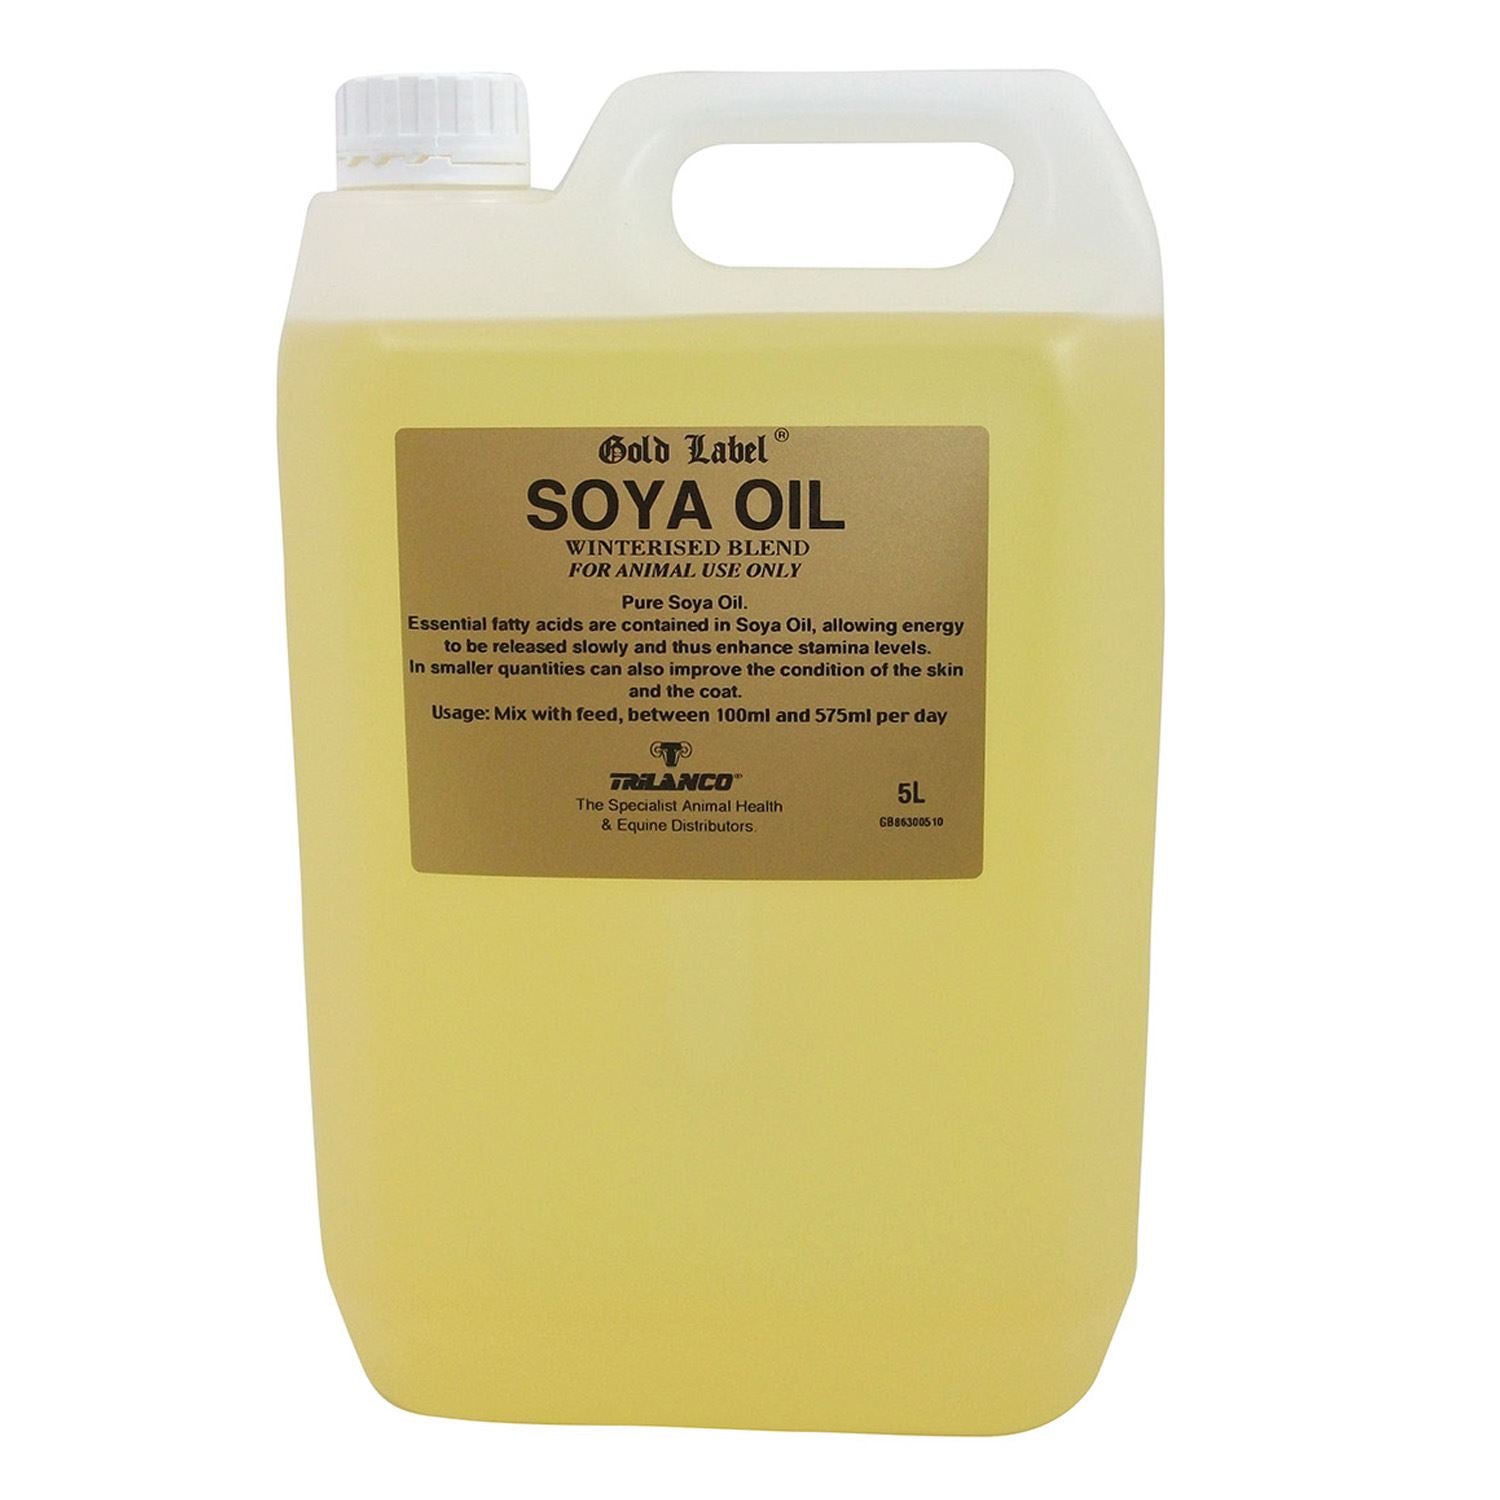 Gold Label Soya Oil - Just Horse Riders